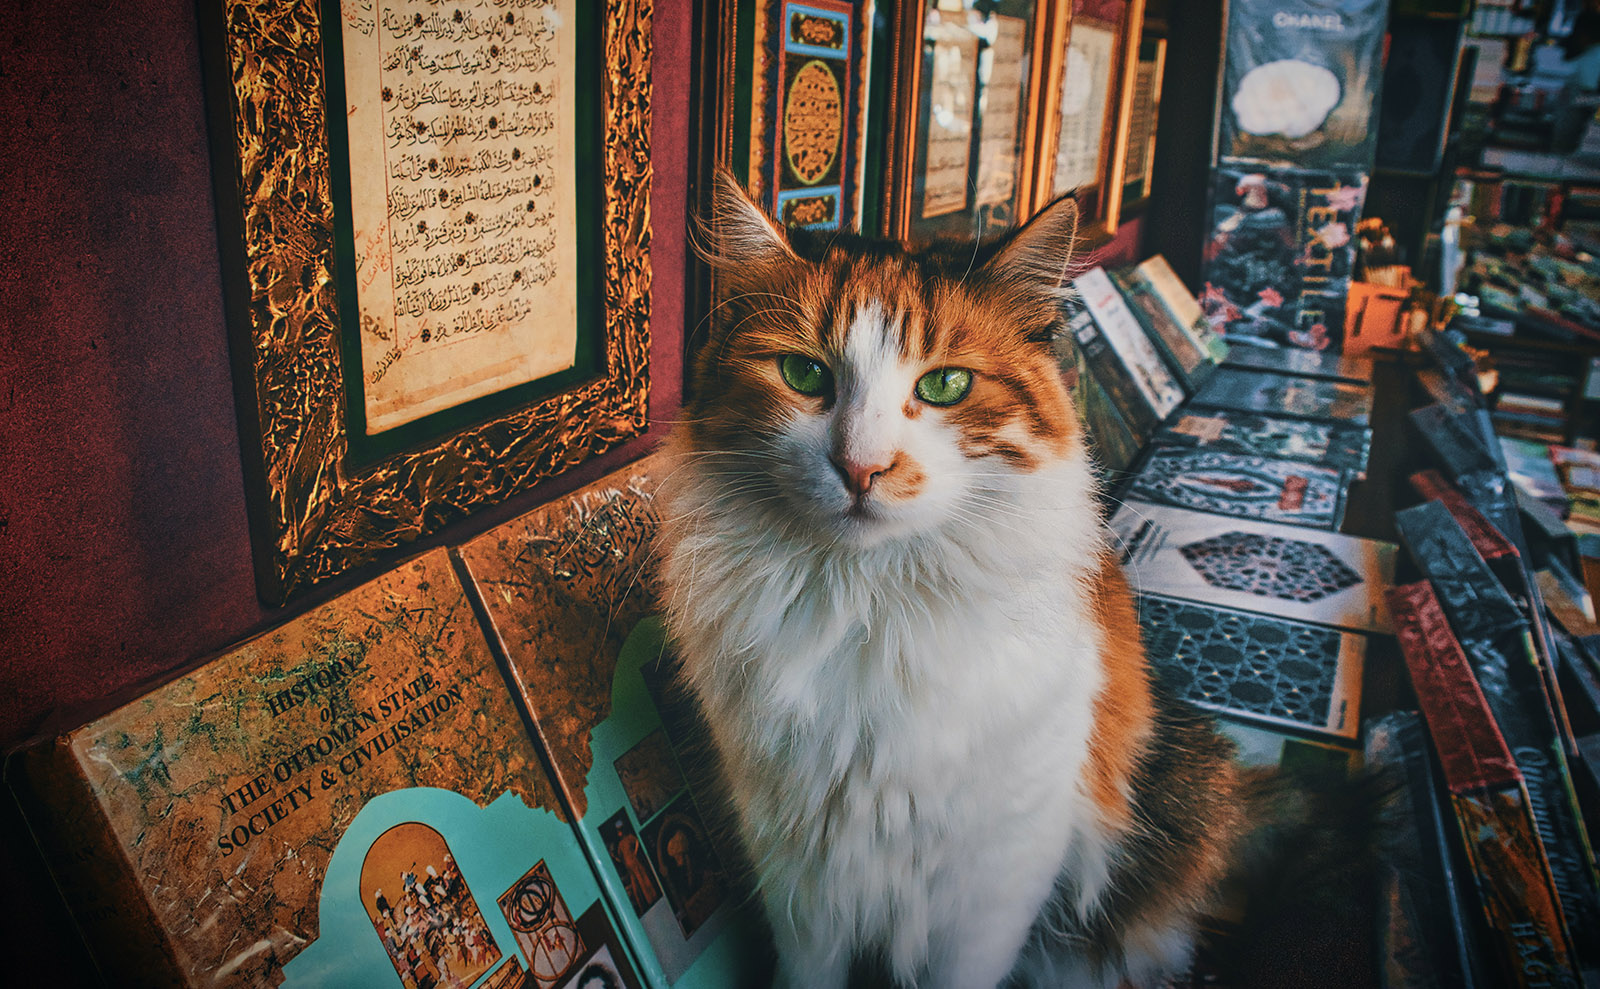 calico cat sitting on top of books and turkish carpets in a bookshop